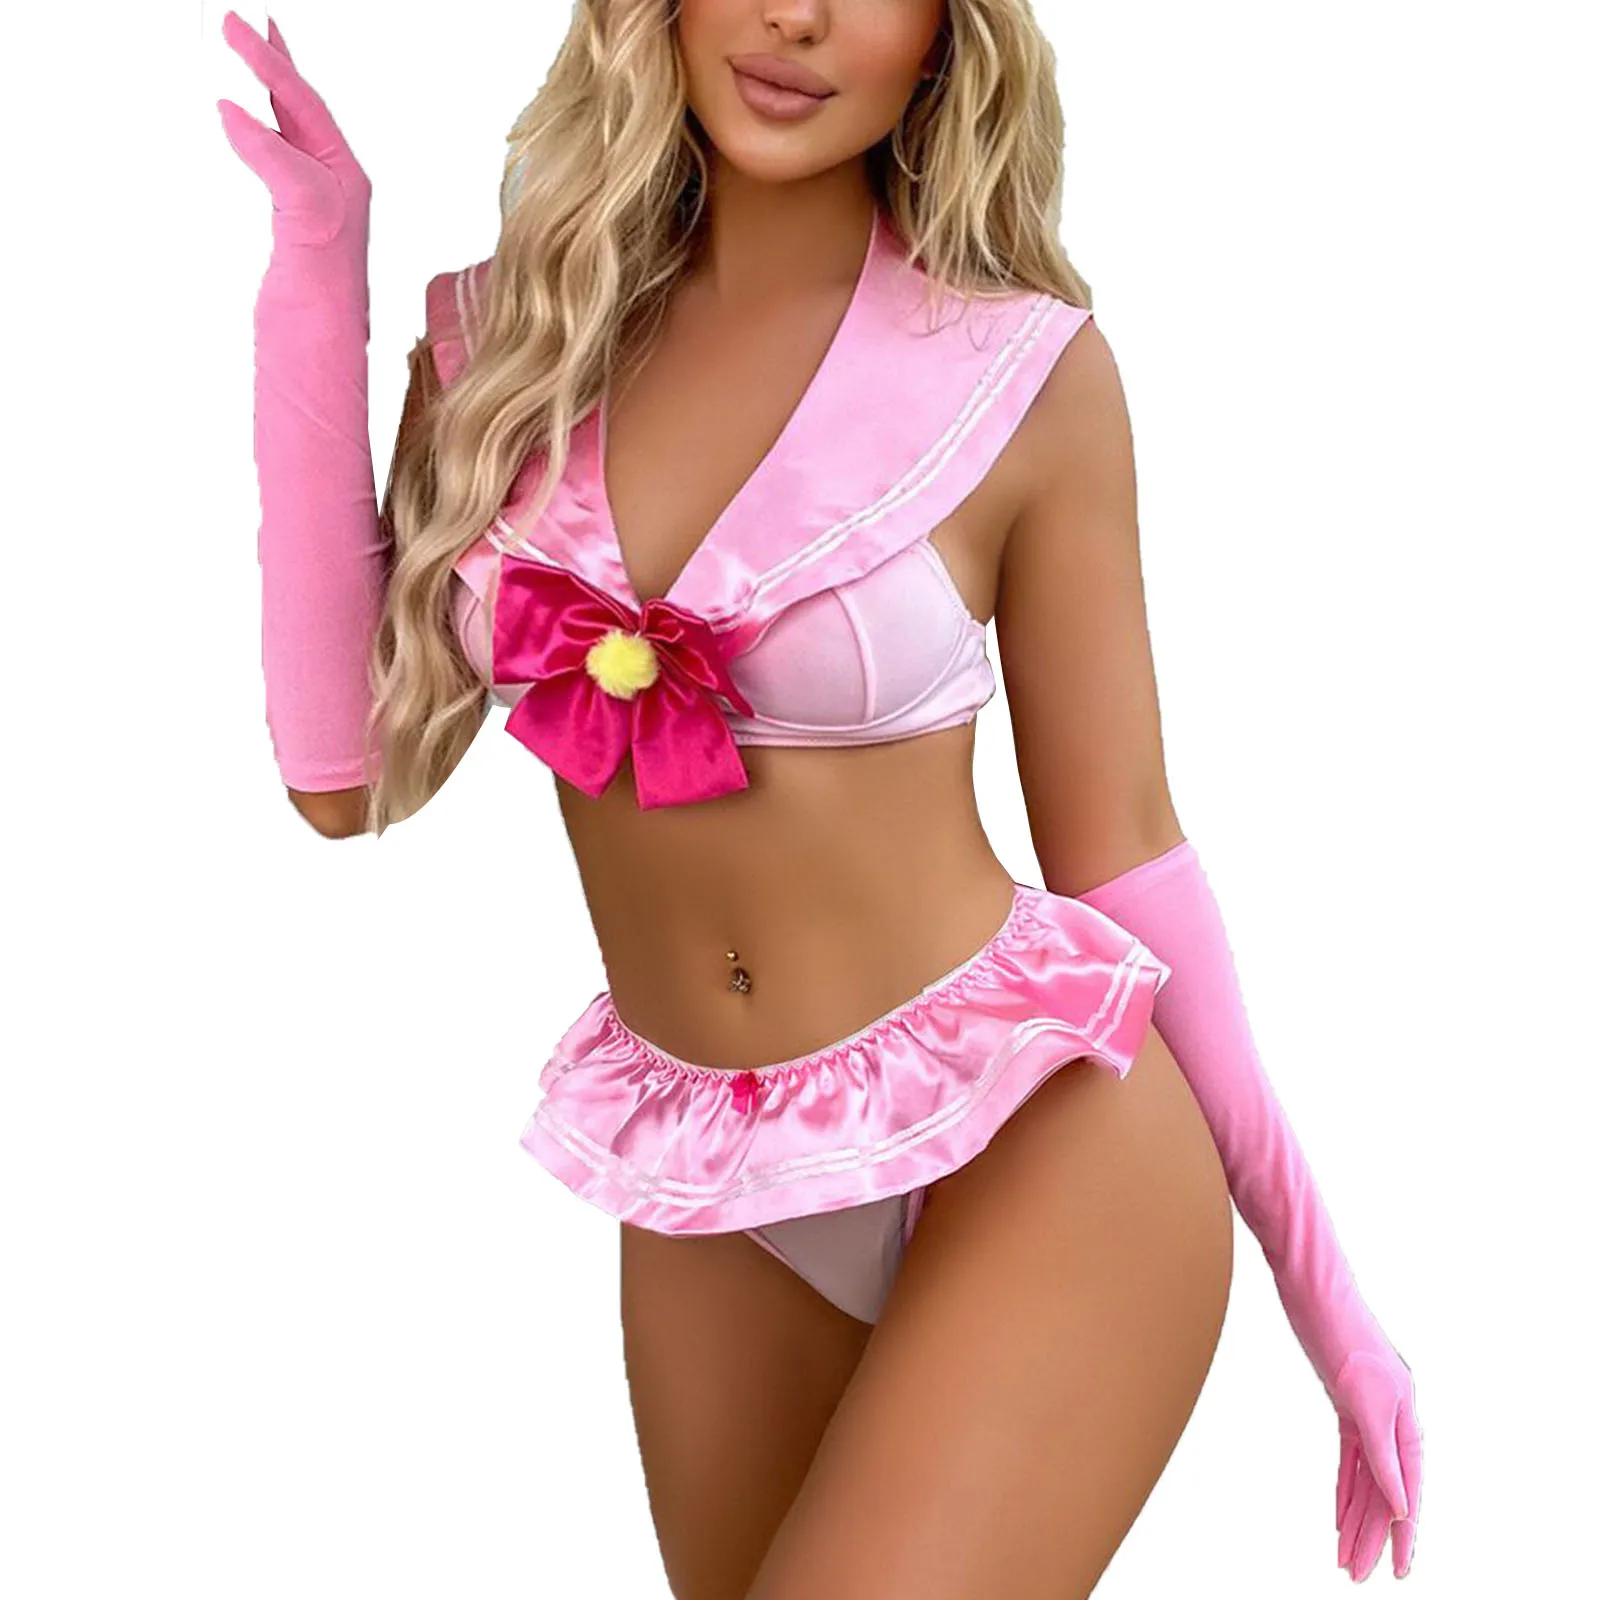 

Women Schoolgirl Role Play Costume Anime Cosplay Outfit Lingerie Nightwear Sailor Collar Bowknot Bra Top Mini Skirt Thong Gloves